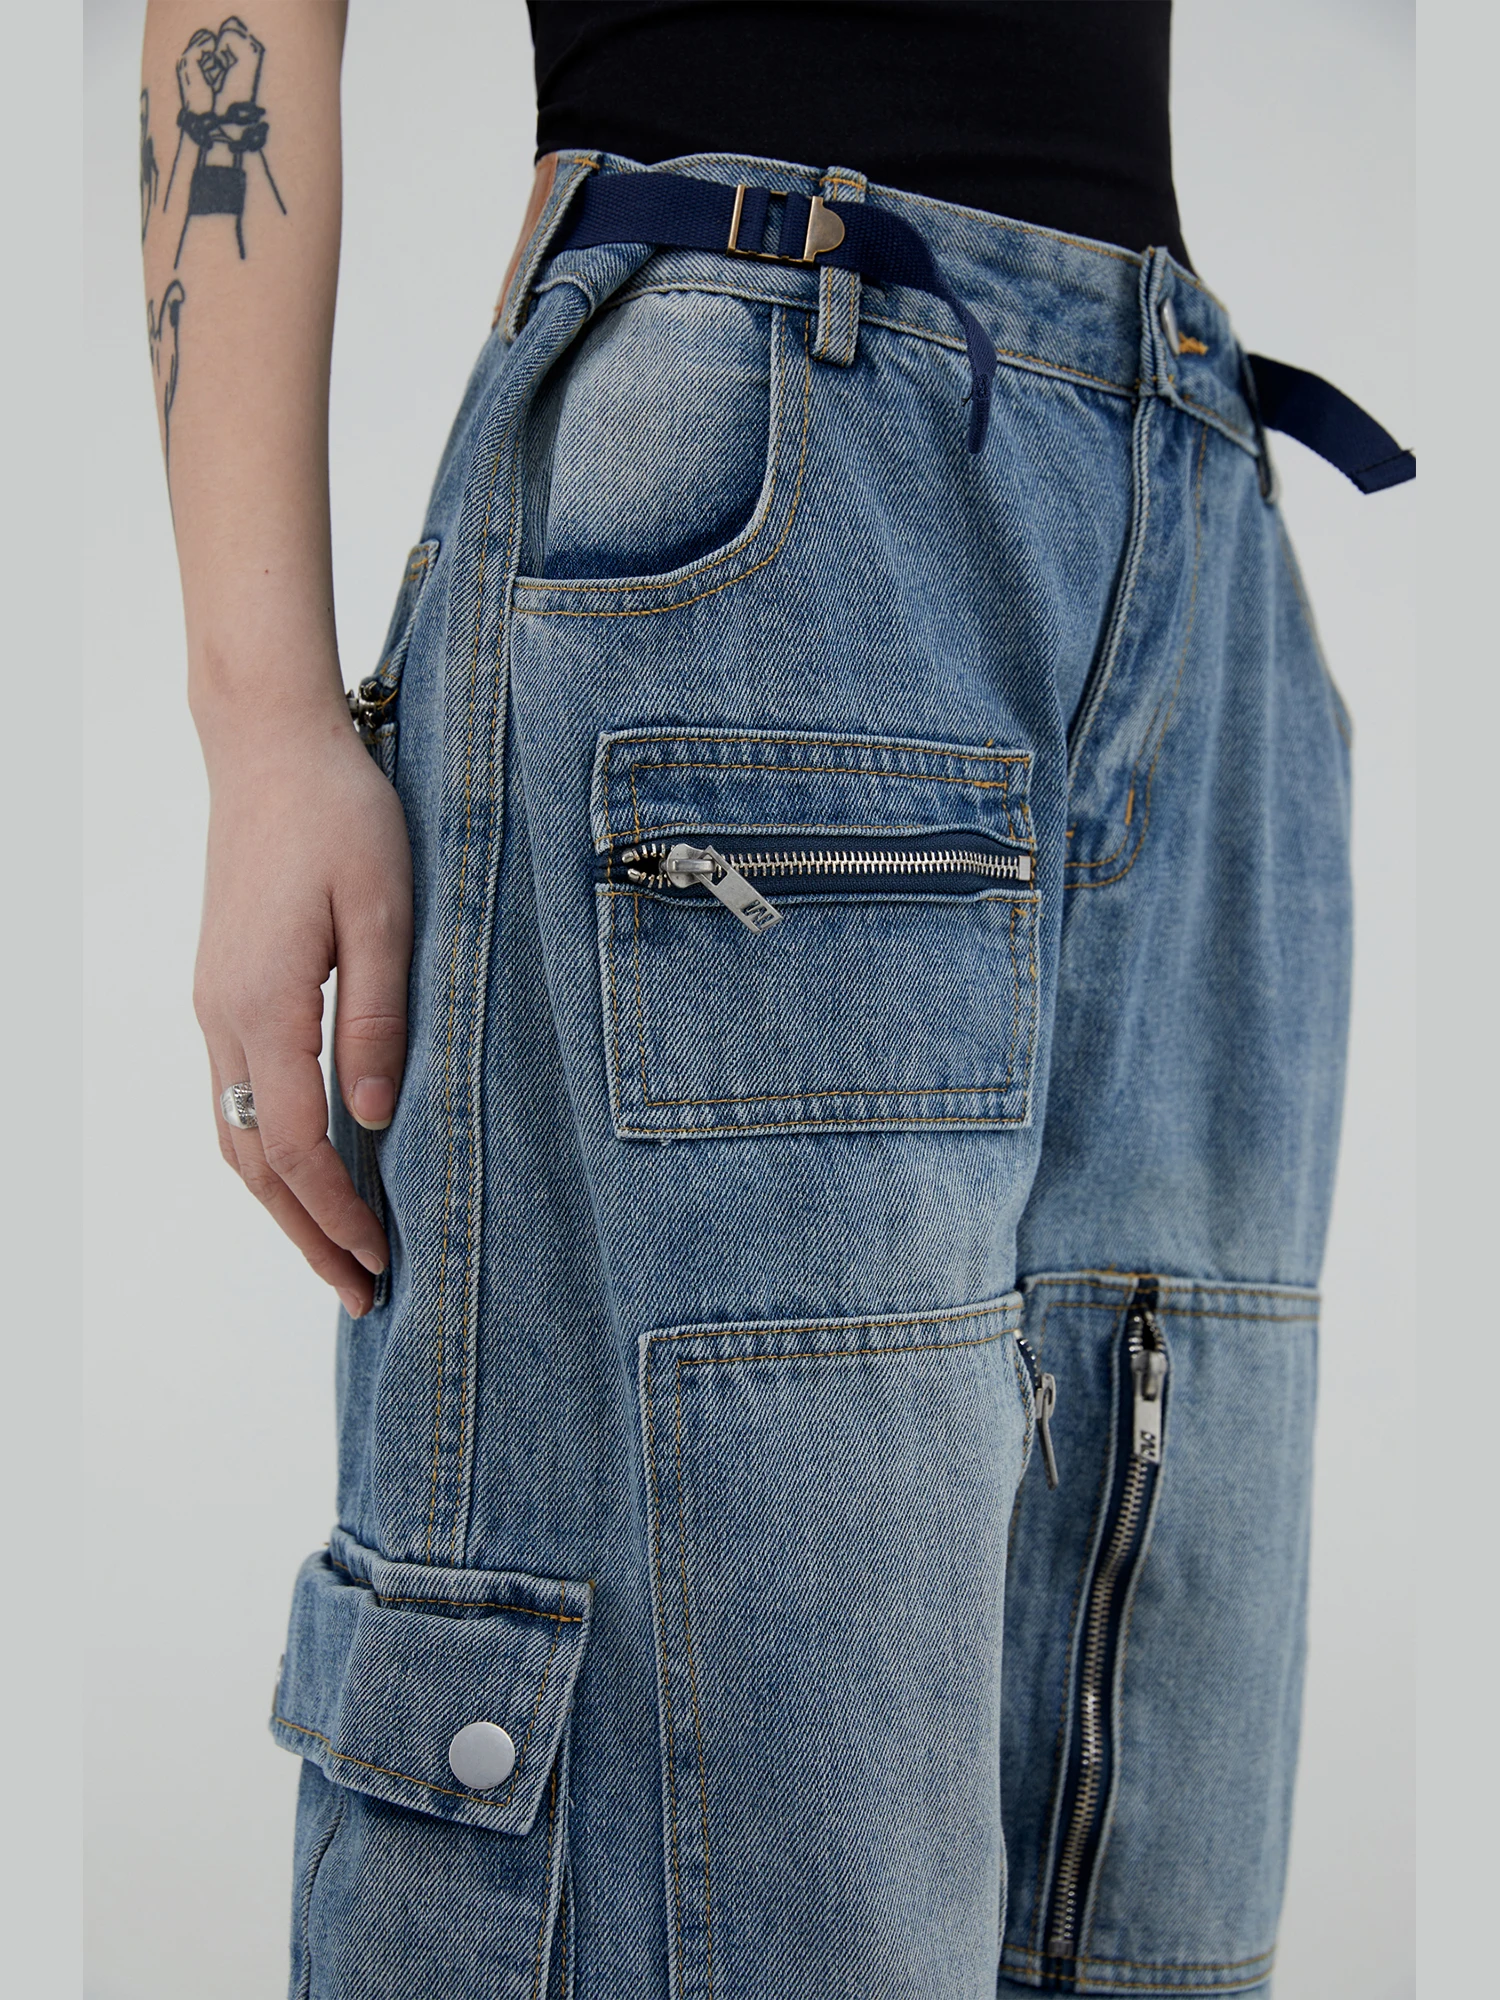 Spring Autumn Multi-Pocket Tooling Wind Do Old Washed Jeans Men's And Women's Loose Wide Leg Can Be Elastic Straight Trousers